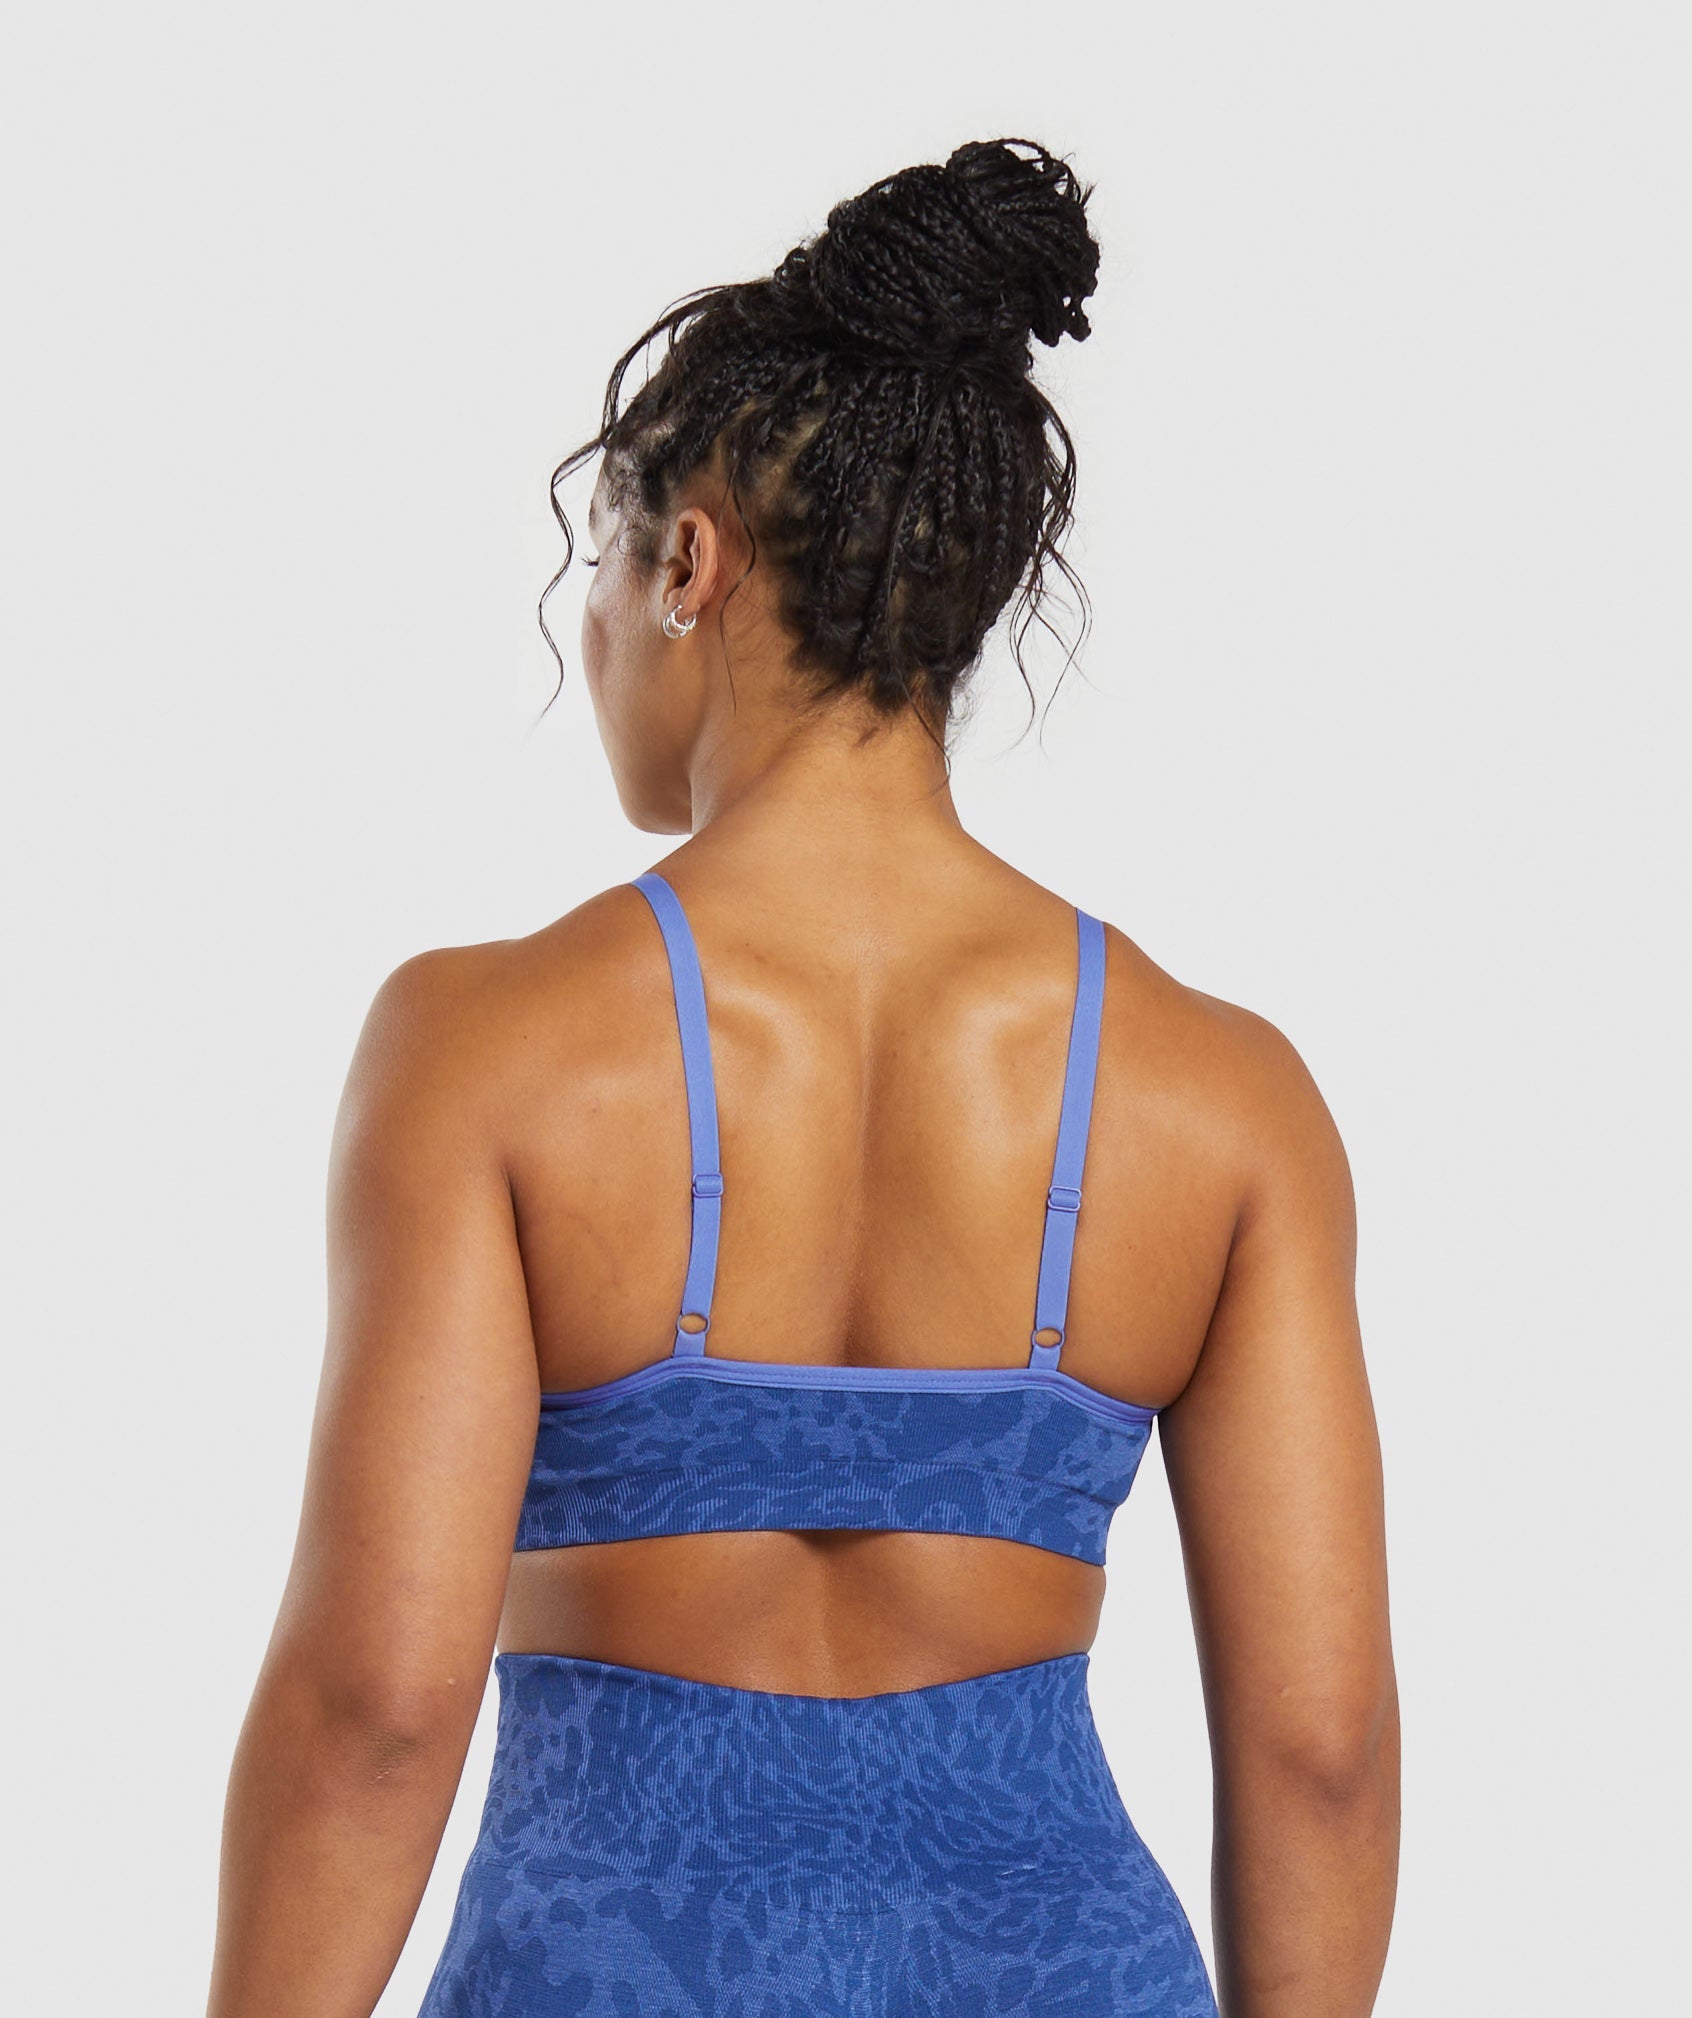 Women's Matching Workout Sets – Gym sets from Gymshark